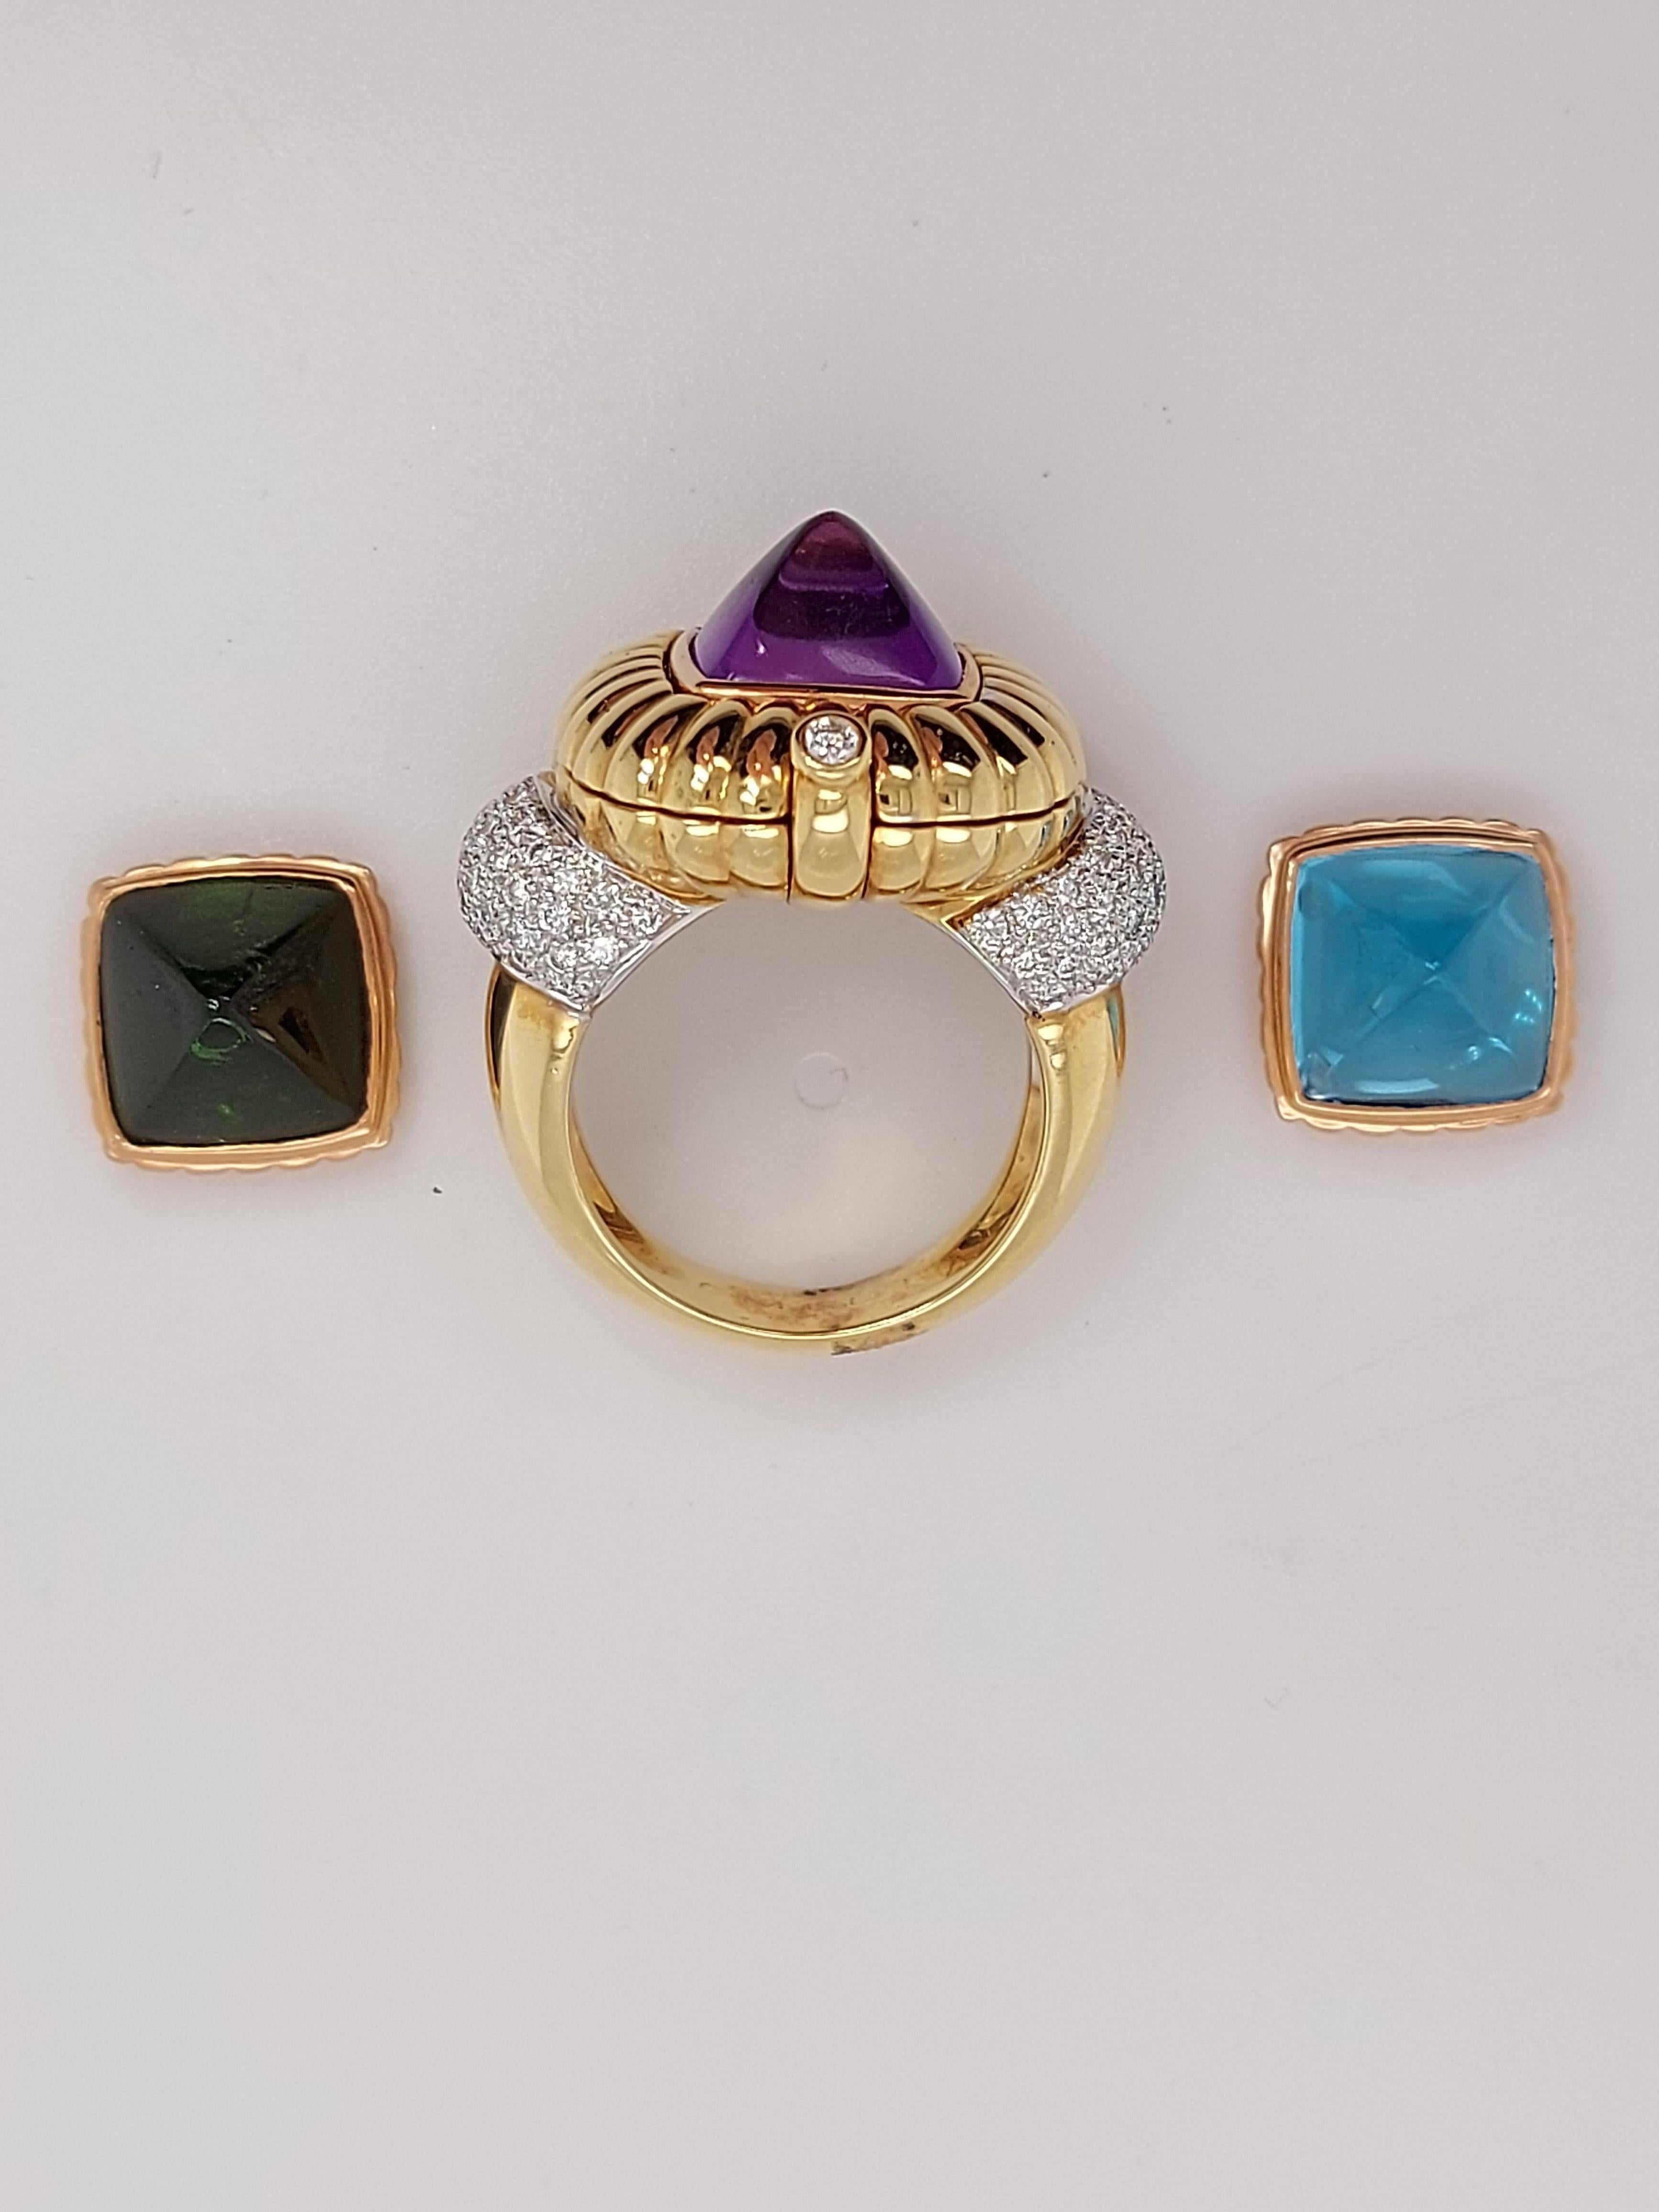 Ring with Diamonds and 3 Interchangeable Pieces Topaz, Tourmaline Precious Stone For Sale 3